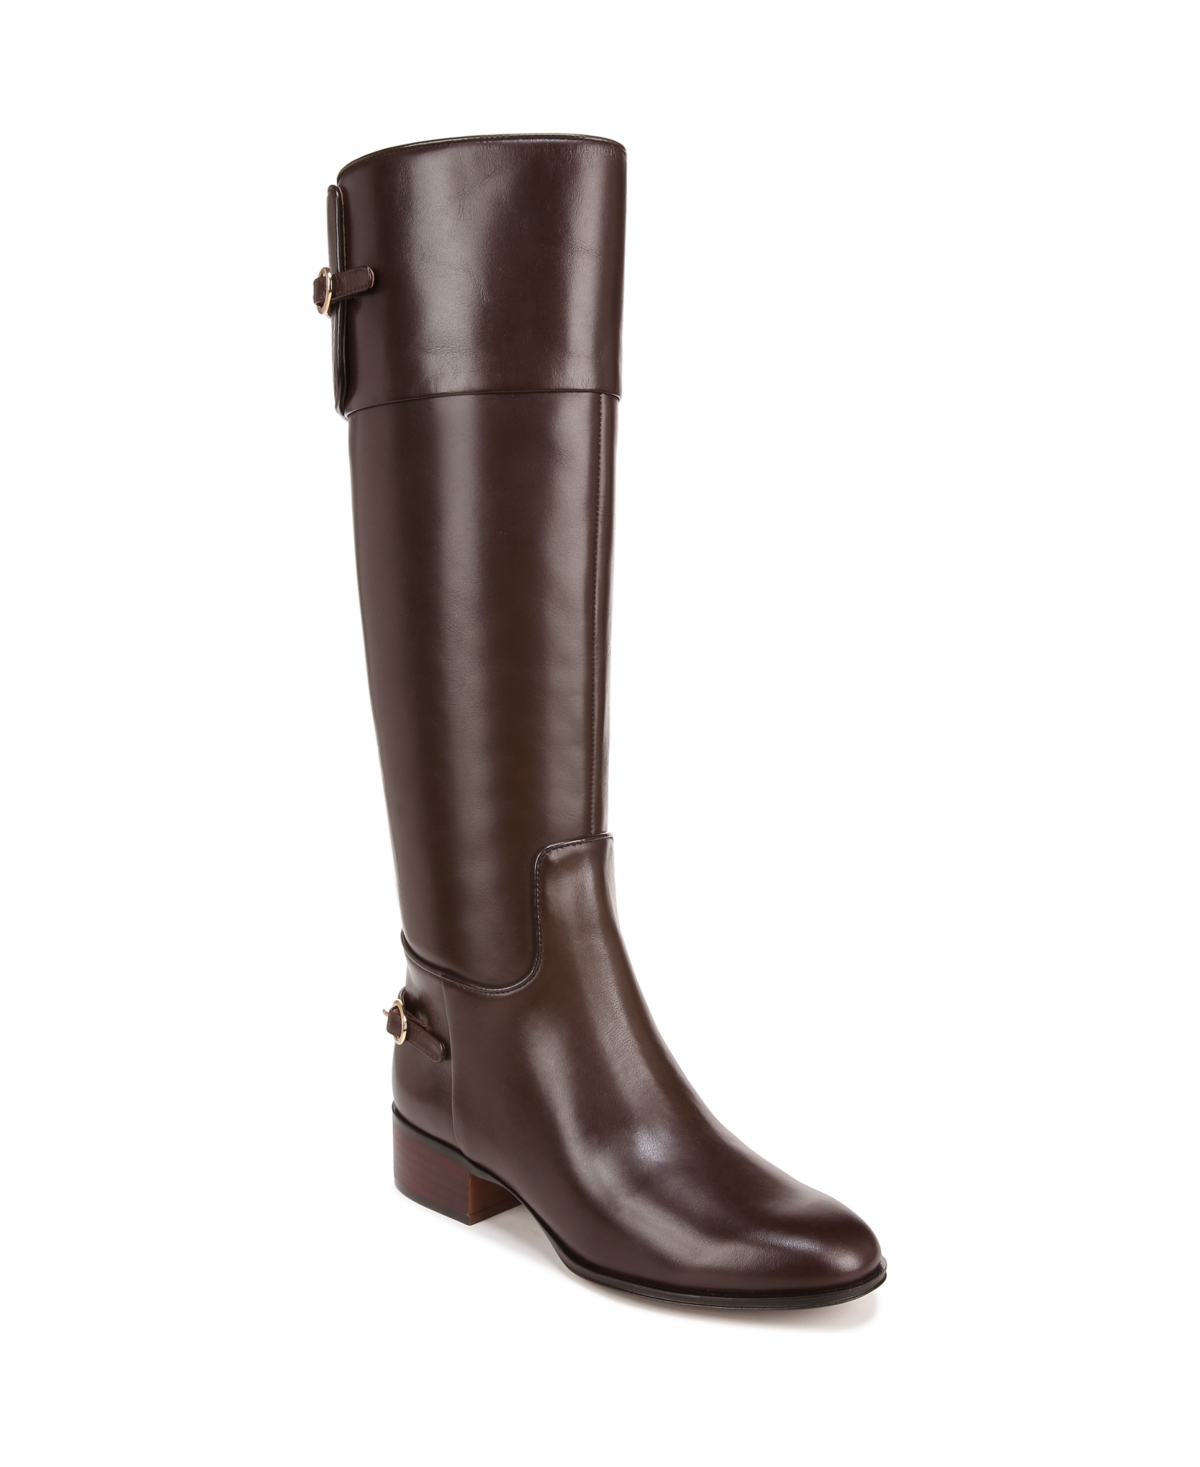 Jazrin Wide Calf Knee High Riding Boots - Brown Leather